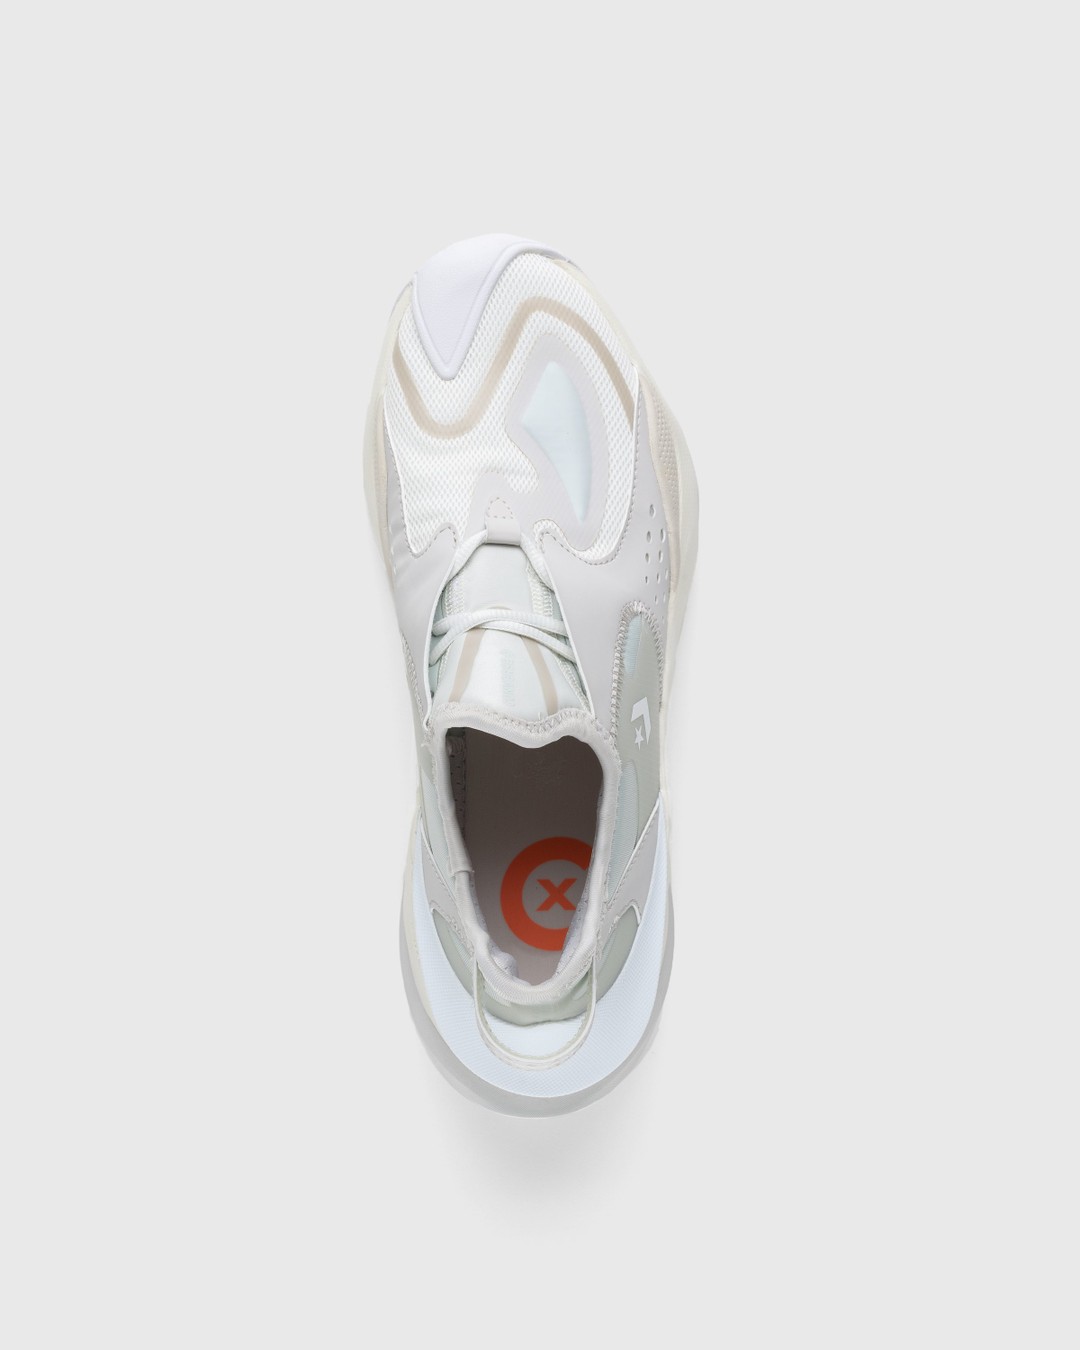 Converse – Aeon Active Cx Ox Egret/Pale Putty - Low Top Sneakers - White - Image 5